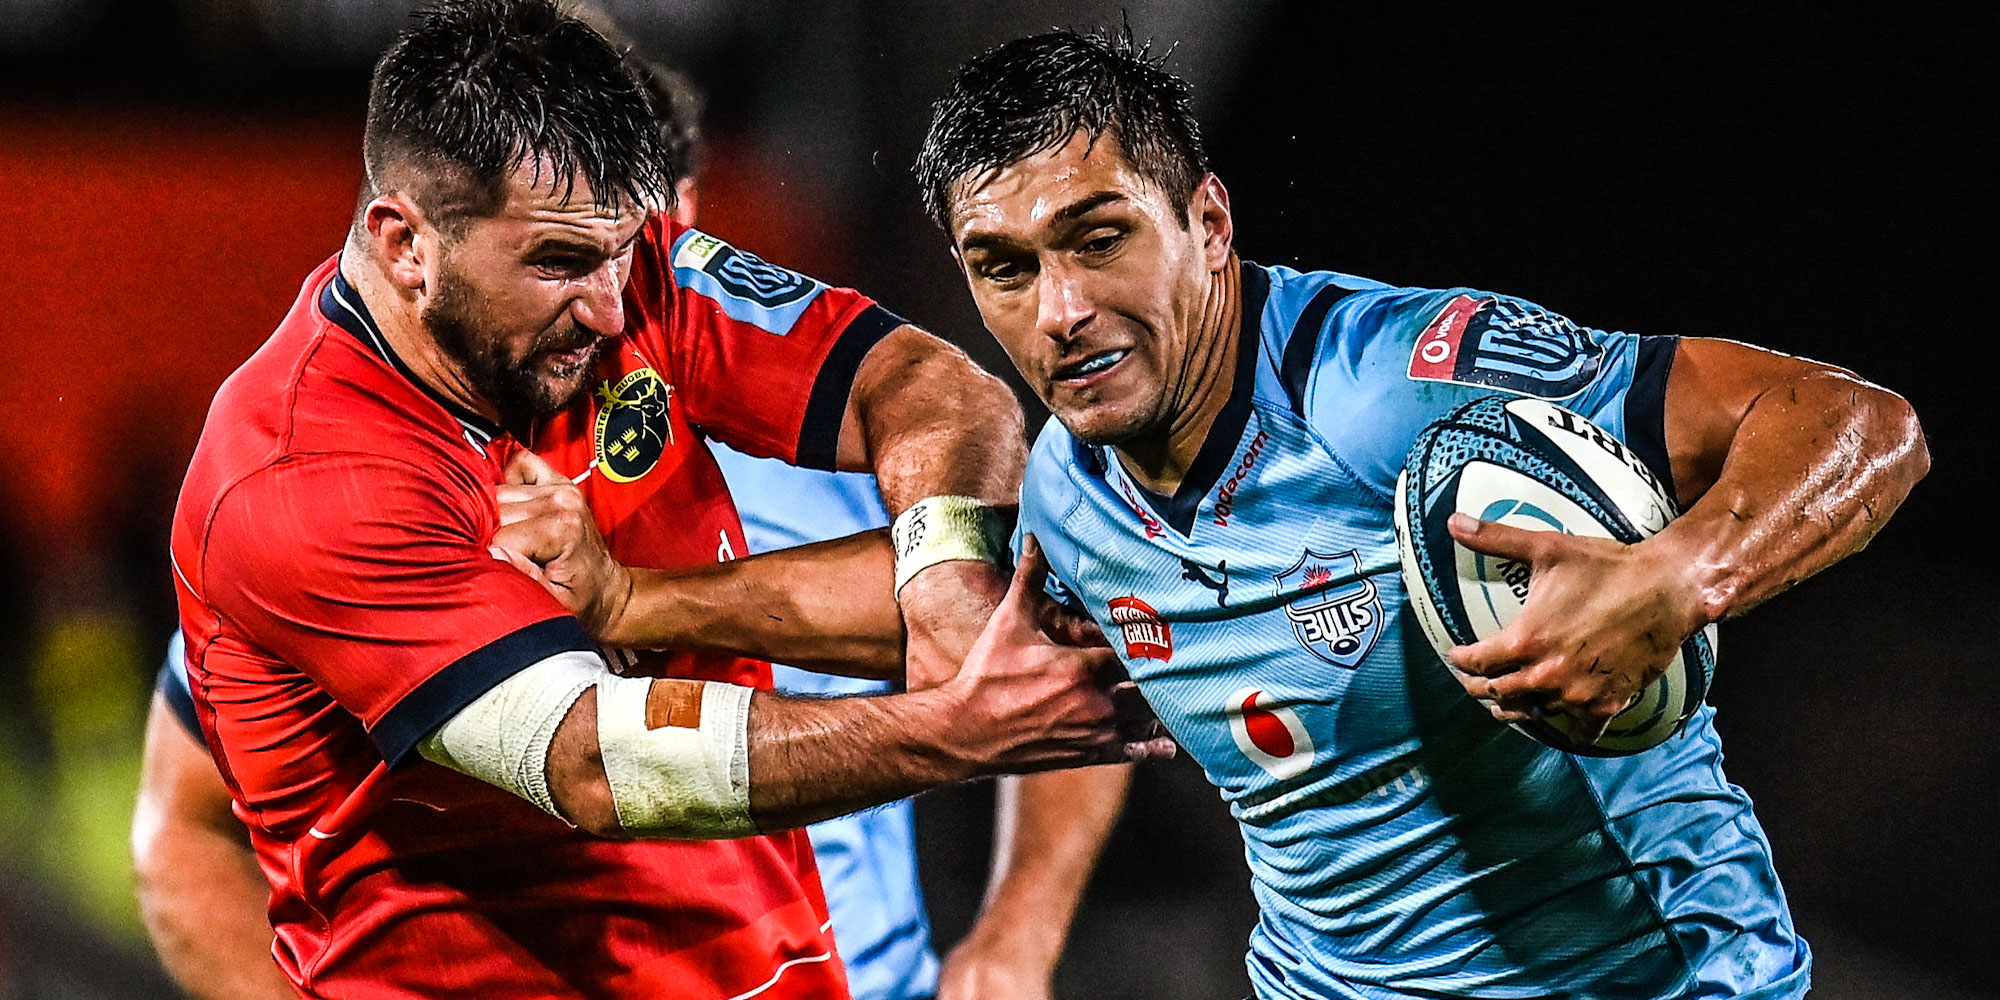 The Vodacom Bulls failed to tame Munster in Limerick.